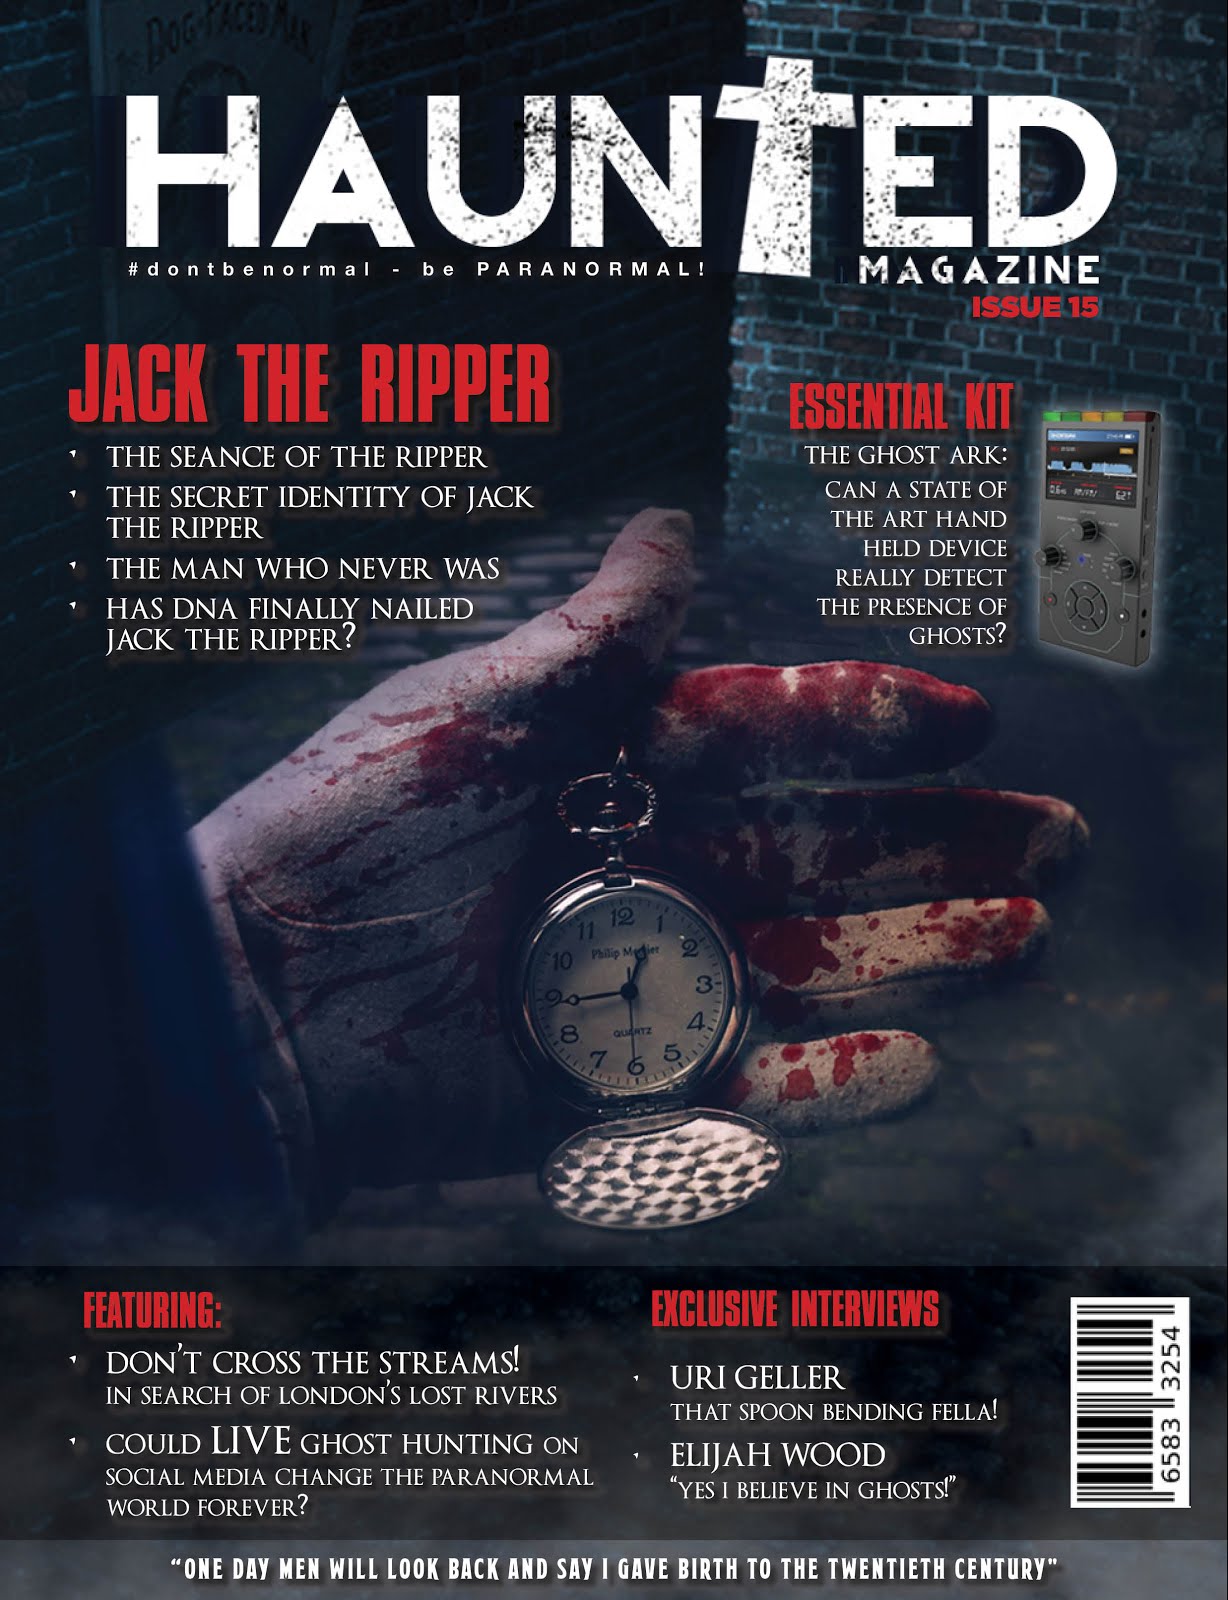 Issue 15: Jack The Ripper